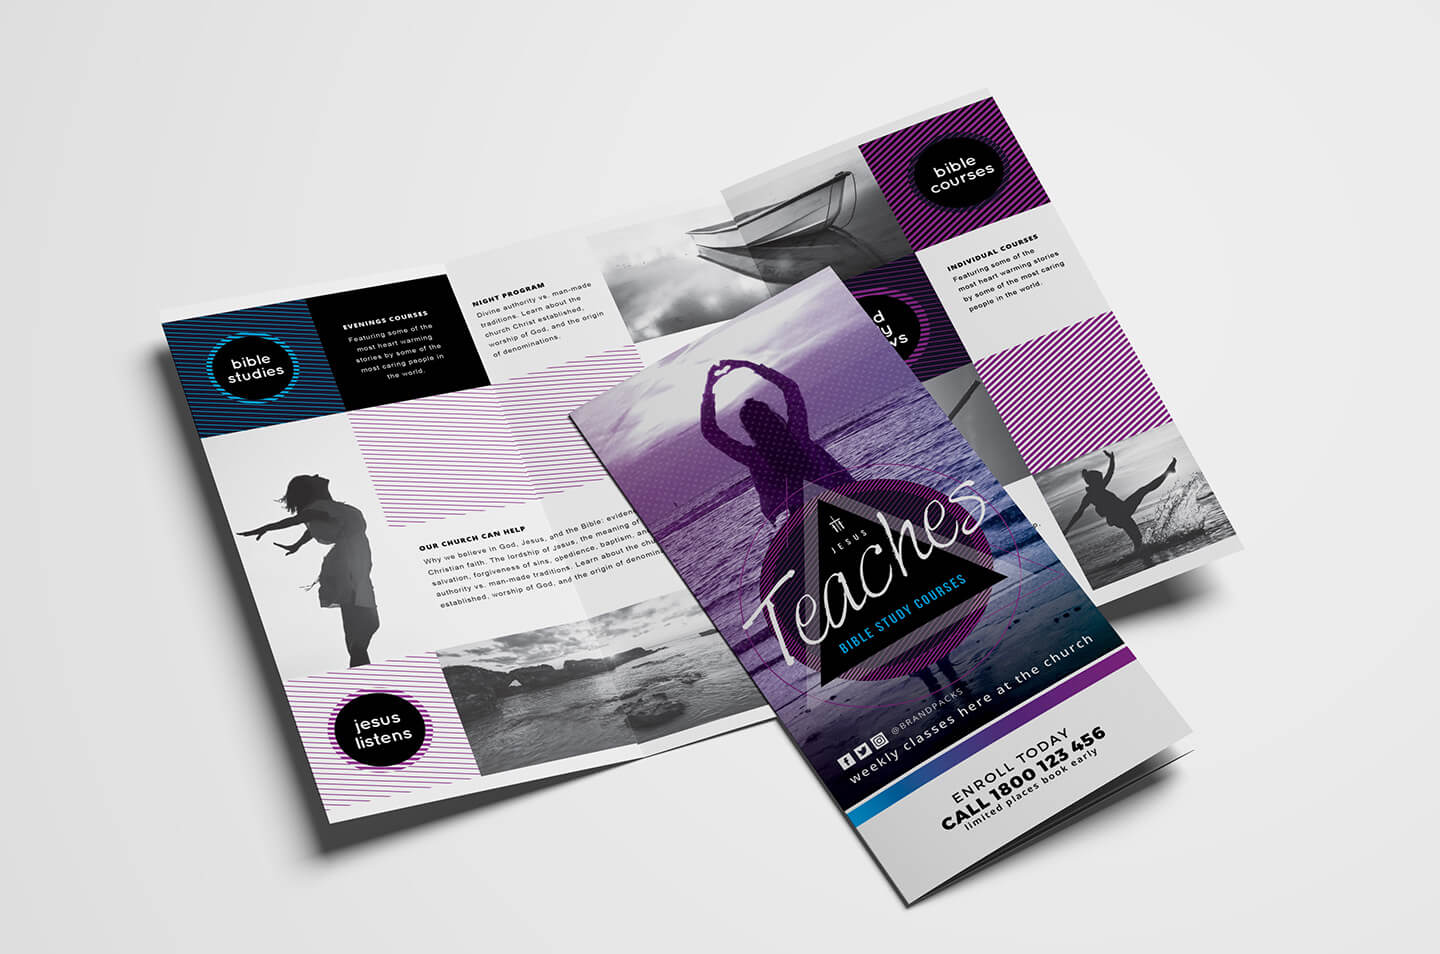 Free Church Templates – Photoshop Psd & Illustrator Ai Throughout Free Illustrator Brochure Templates Download